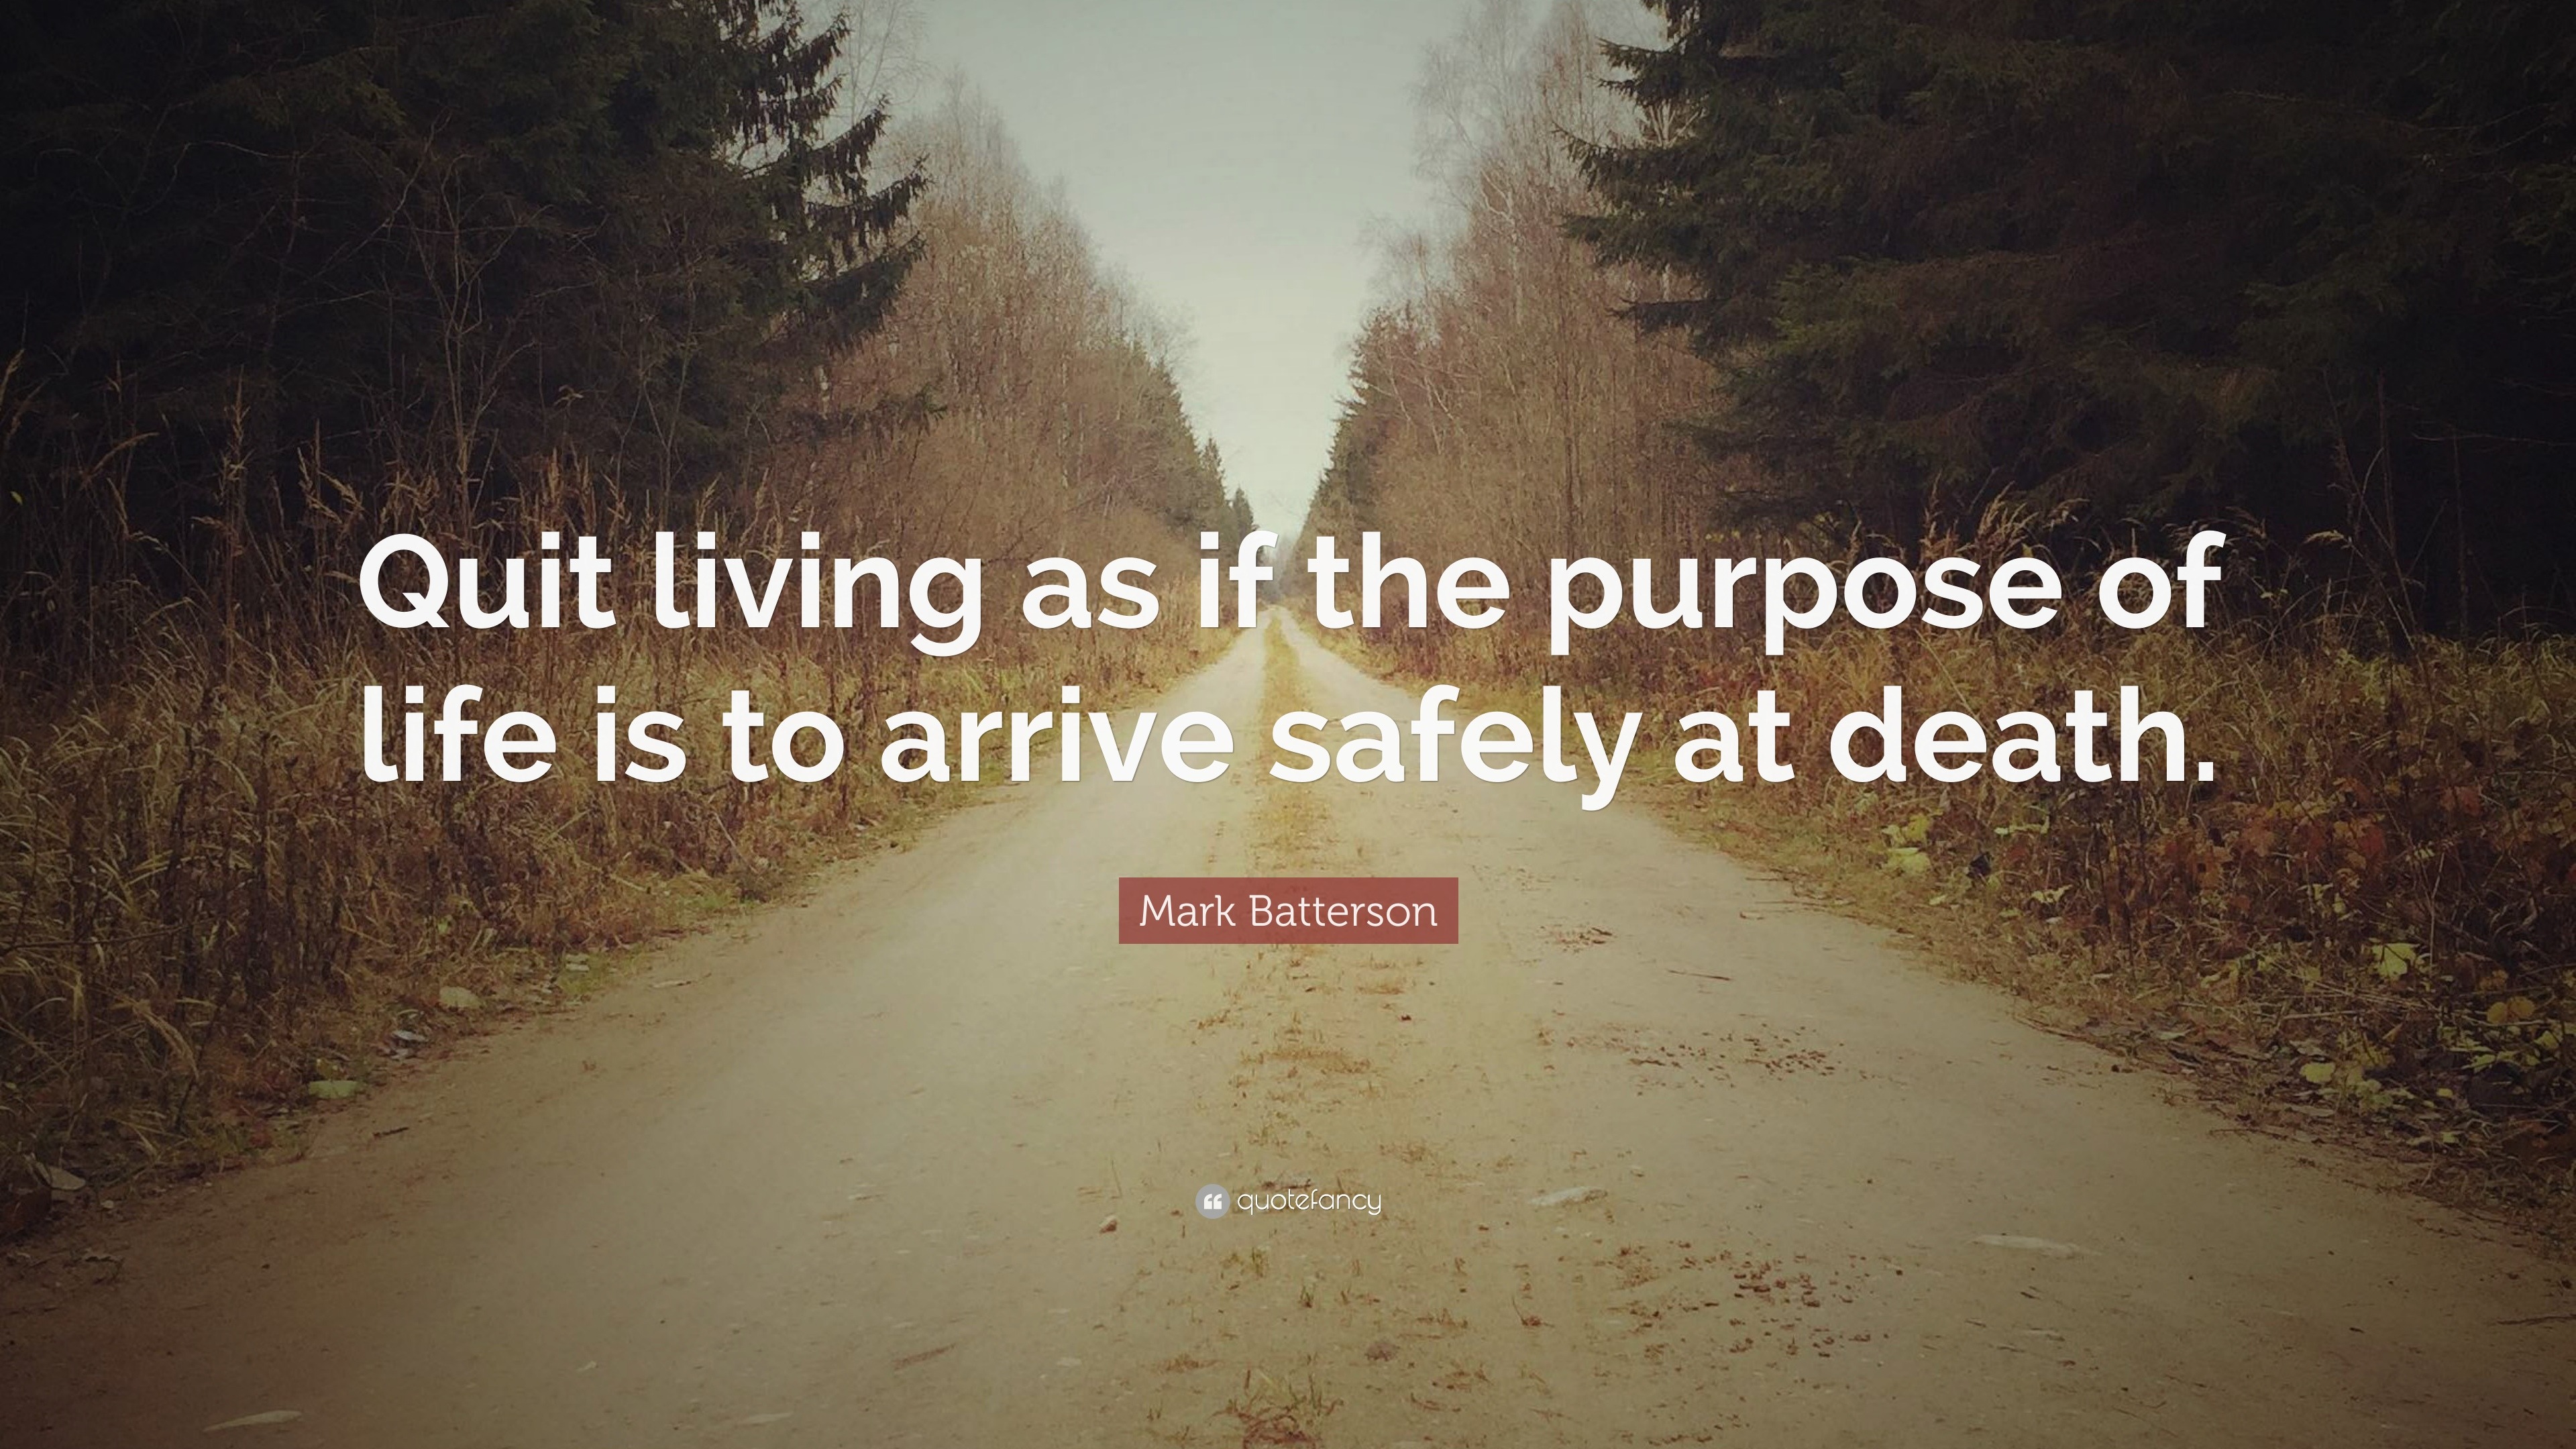 Mark Batterson Quote: “Quit living as if the purpose of life is to ...